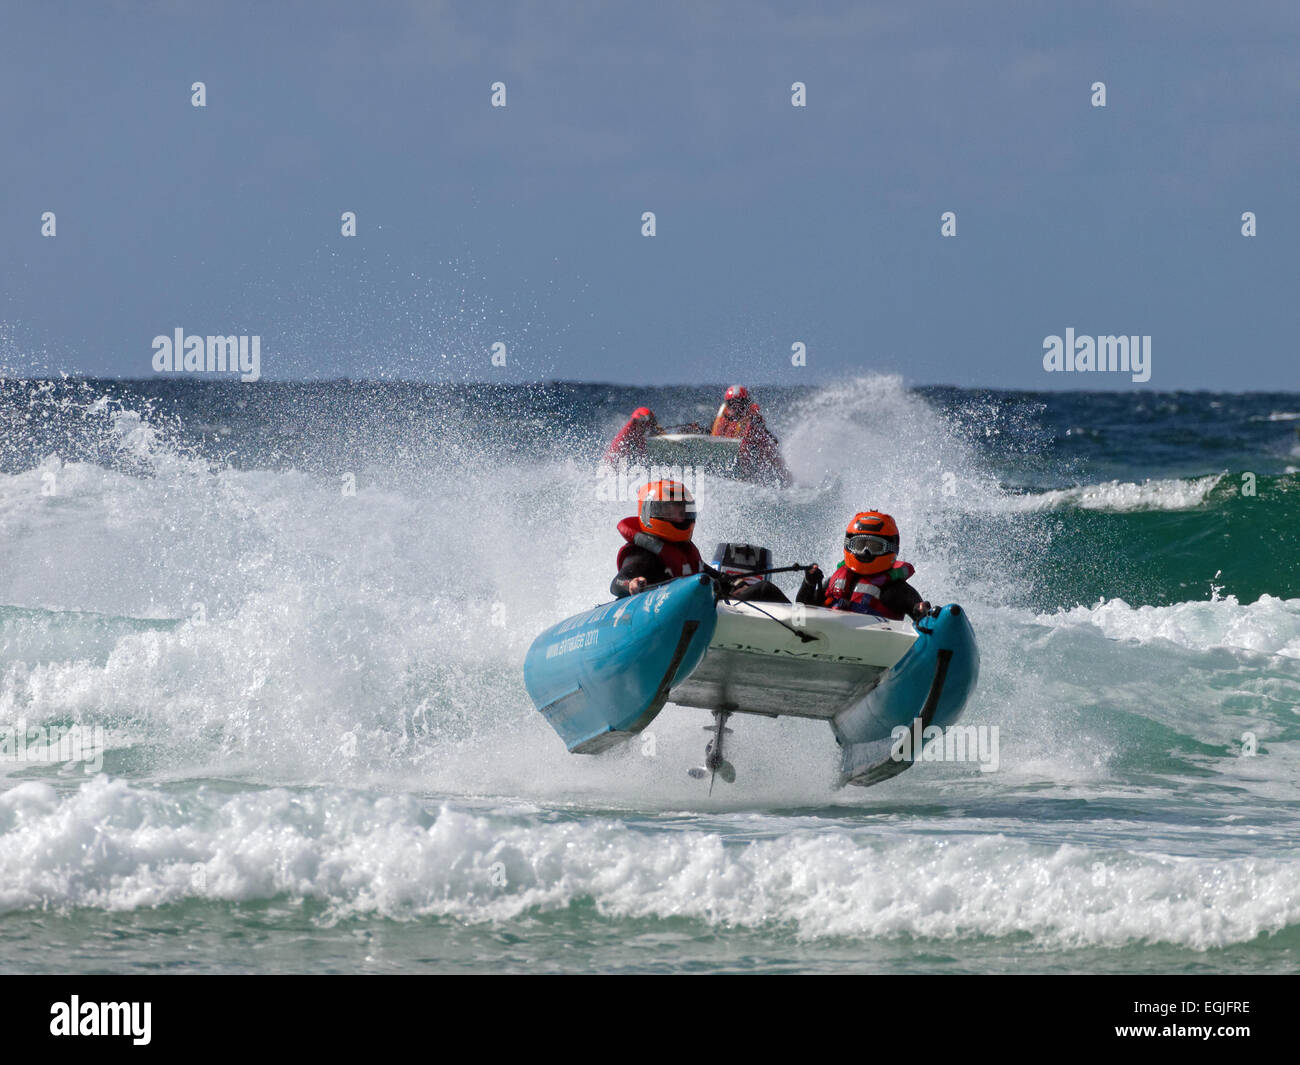 Two man crewed Zap cat racing boat airborne in the surf Stock Photo